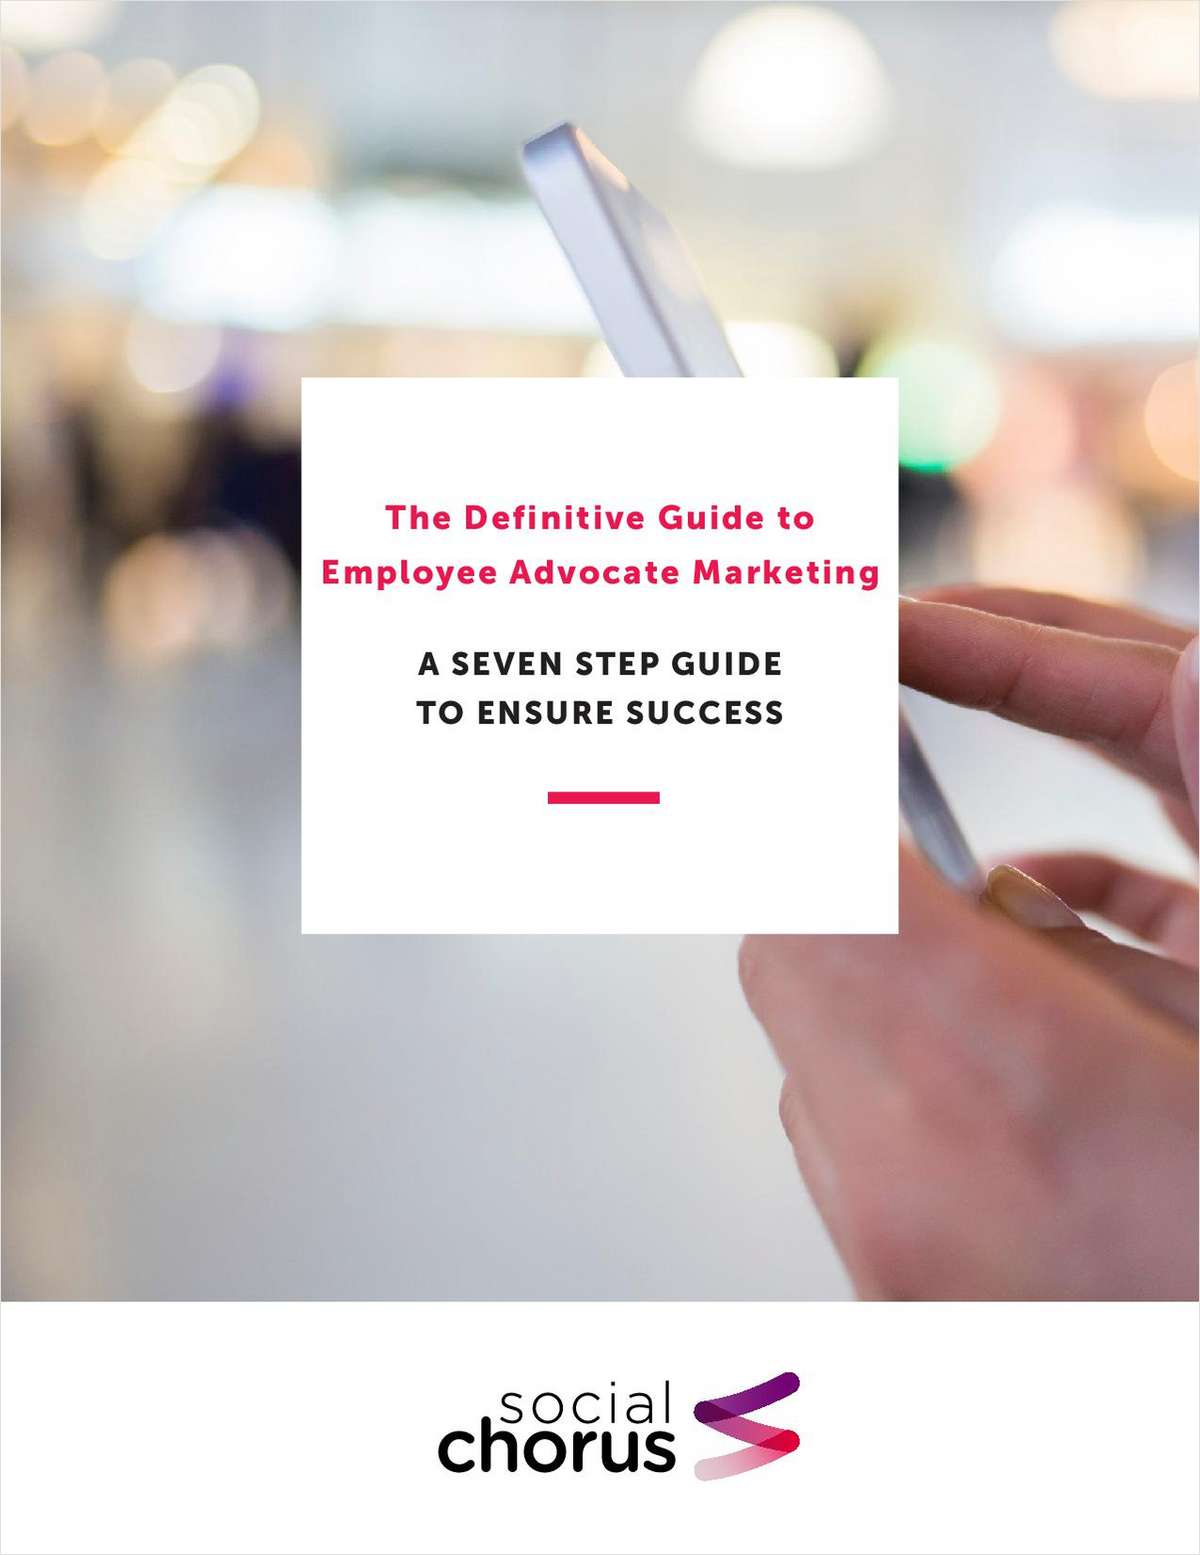 The Definitive Guide to Employee Advocate Marketing